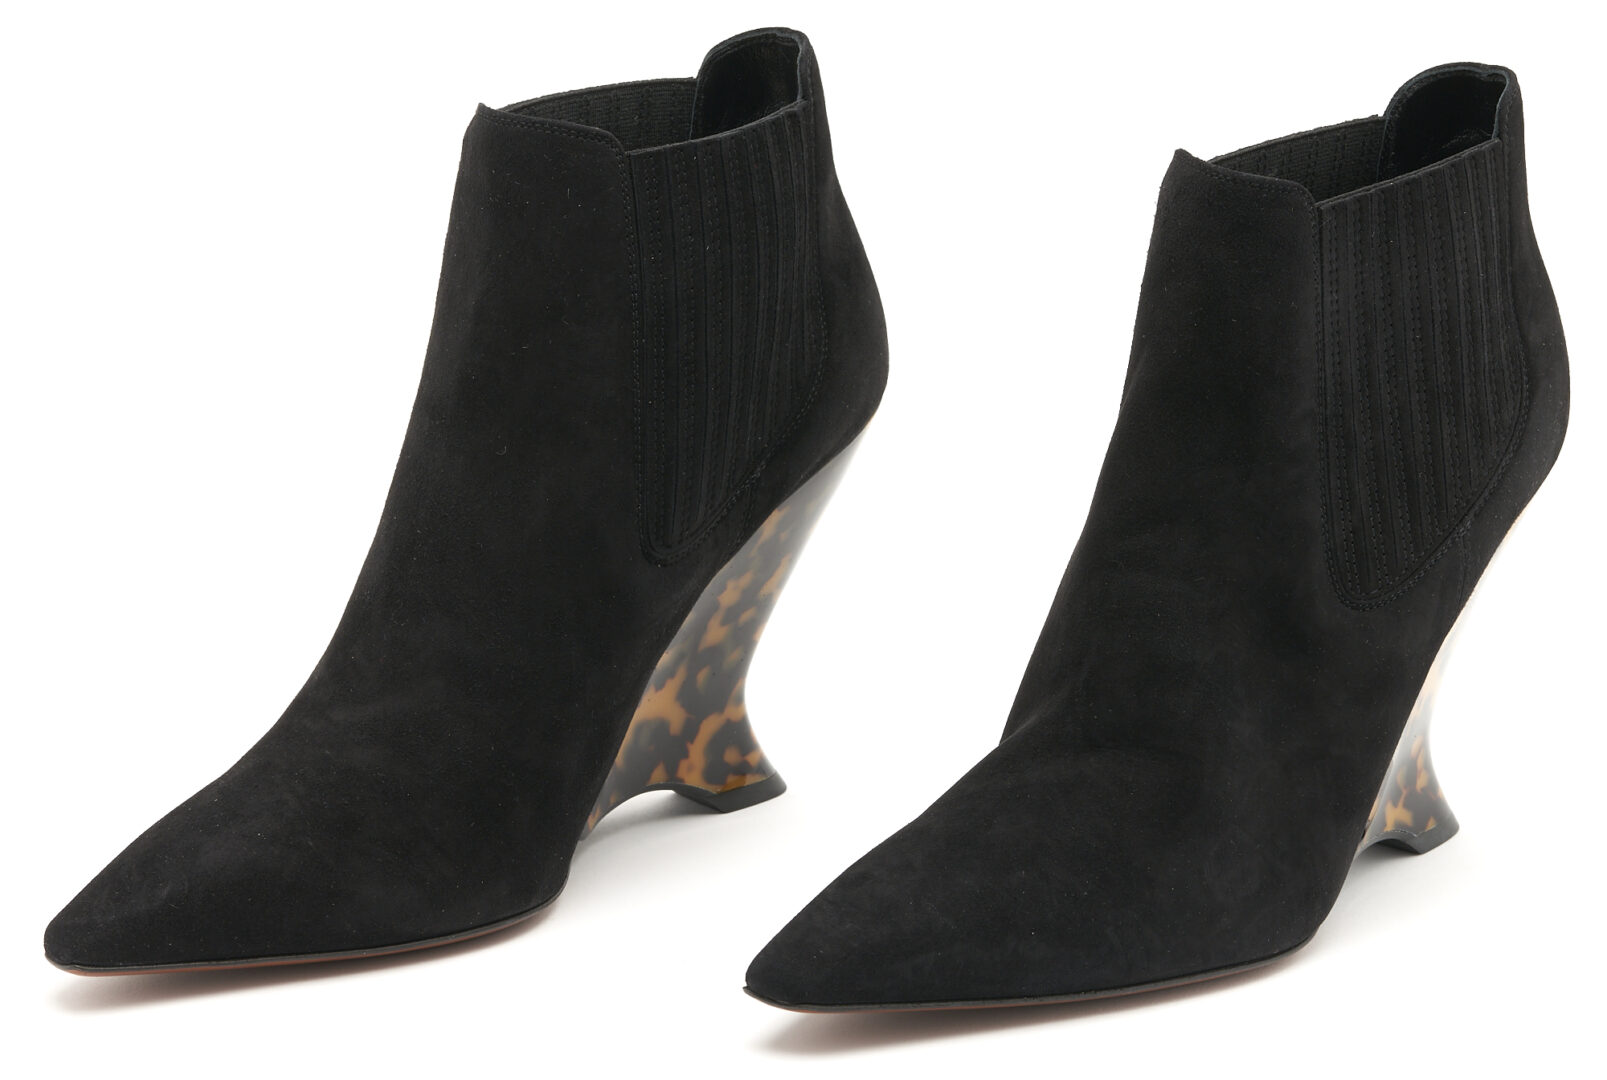 Lot 721: 3 Pairs of Christian Dior Black Ankle Boots,  incl. Huggy, Optic D, Savane